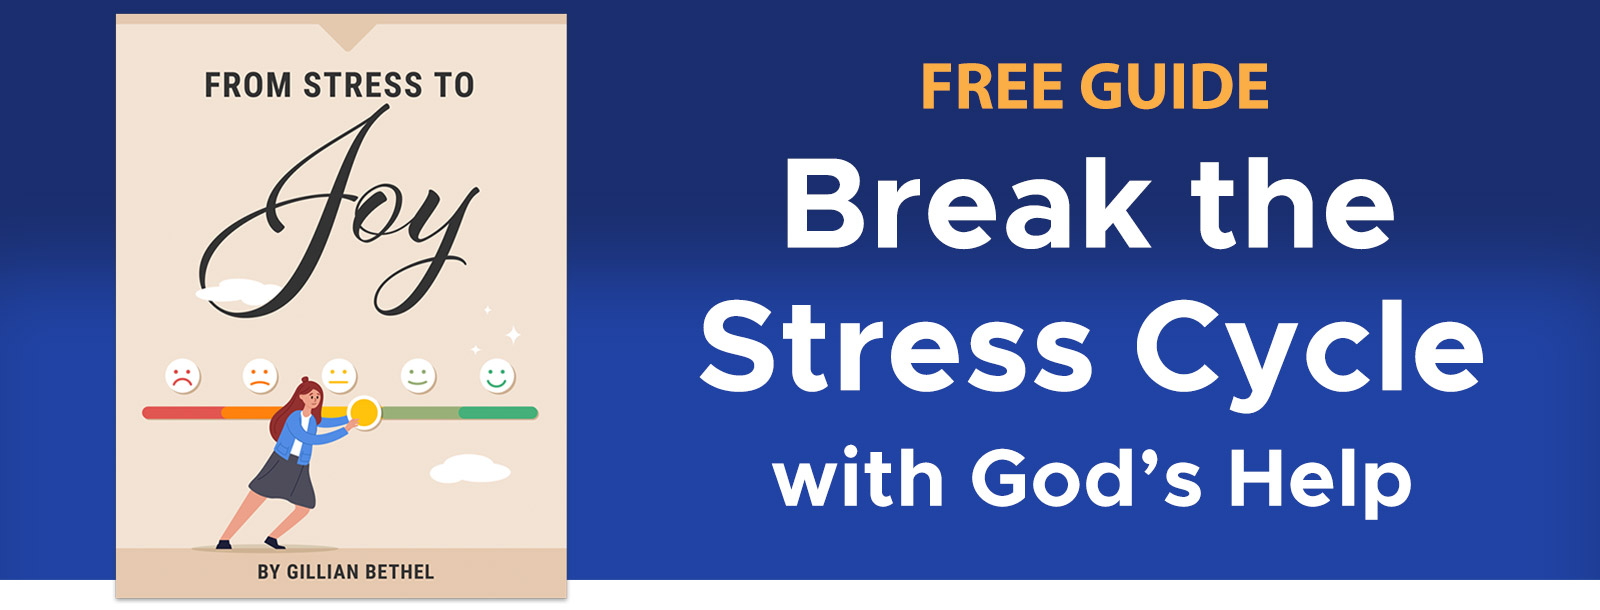 Free Guide - Break the Stress Cycle with God's Help